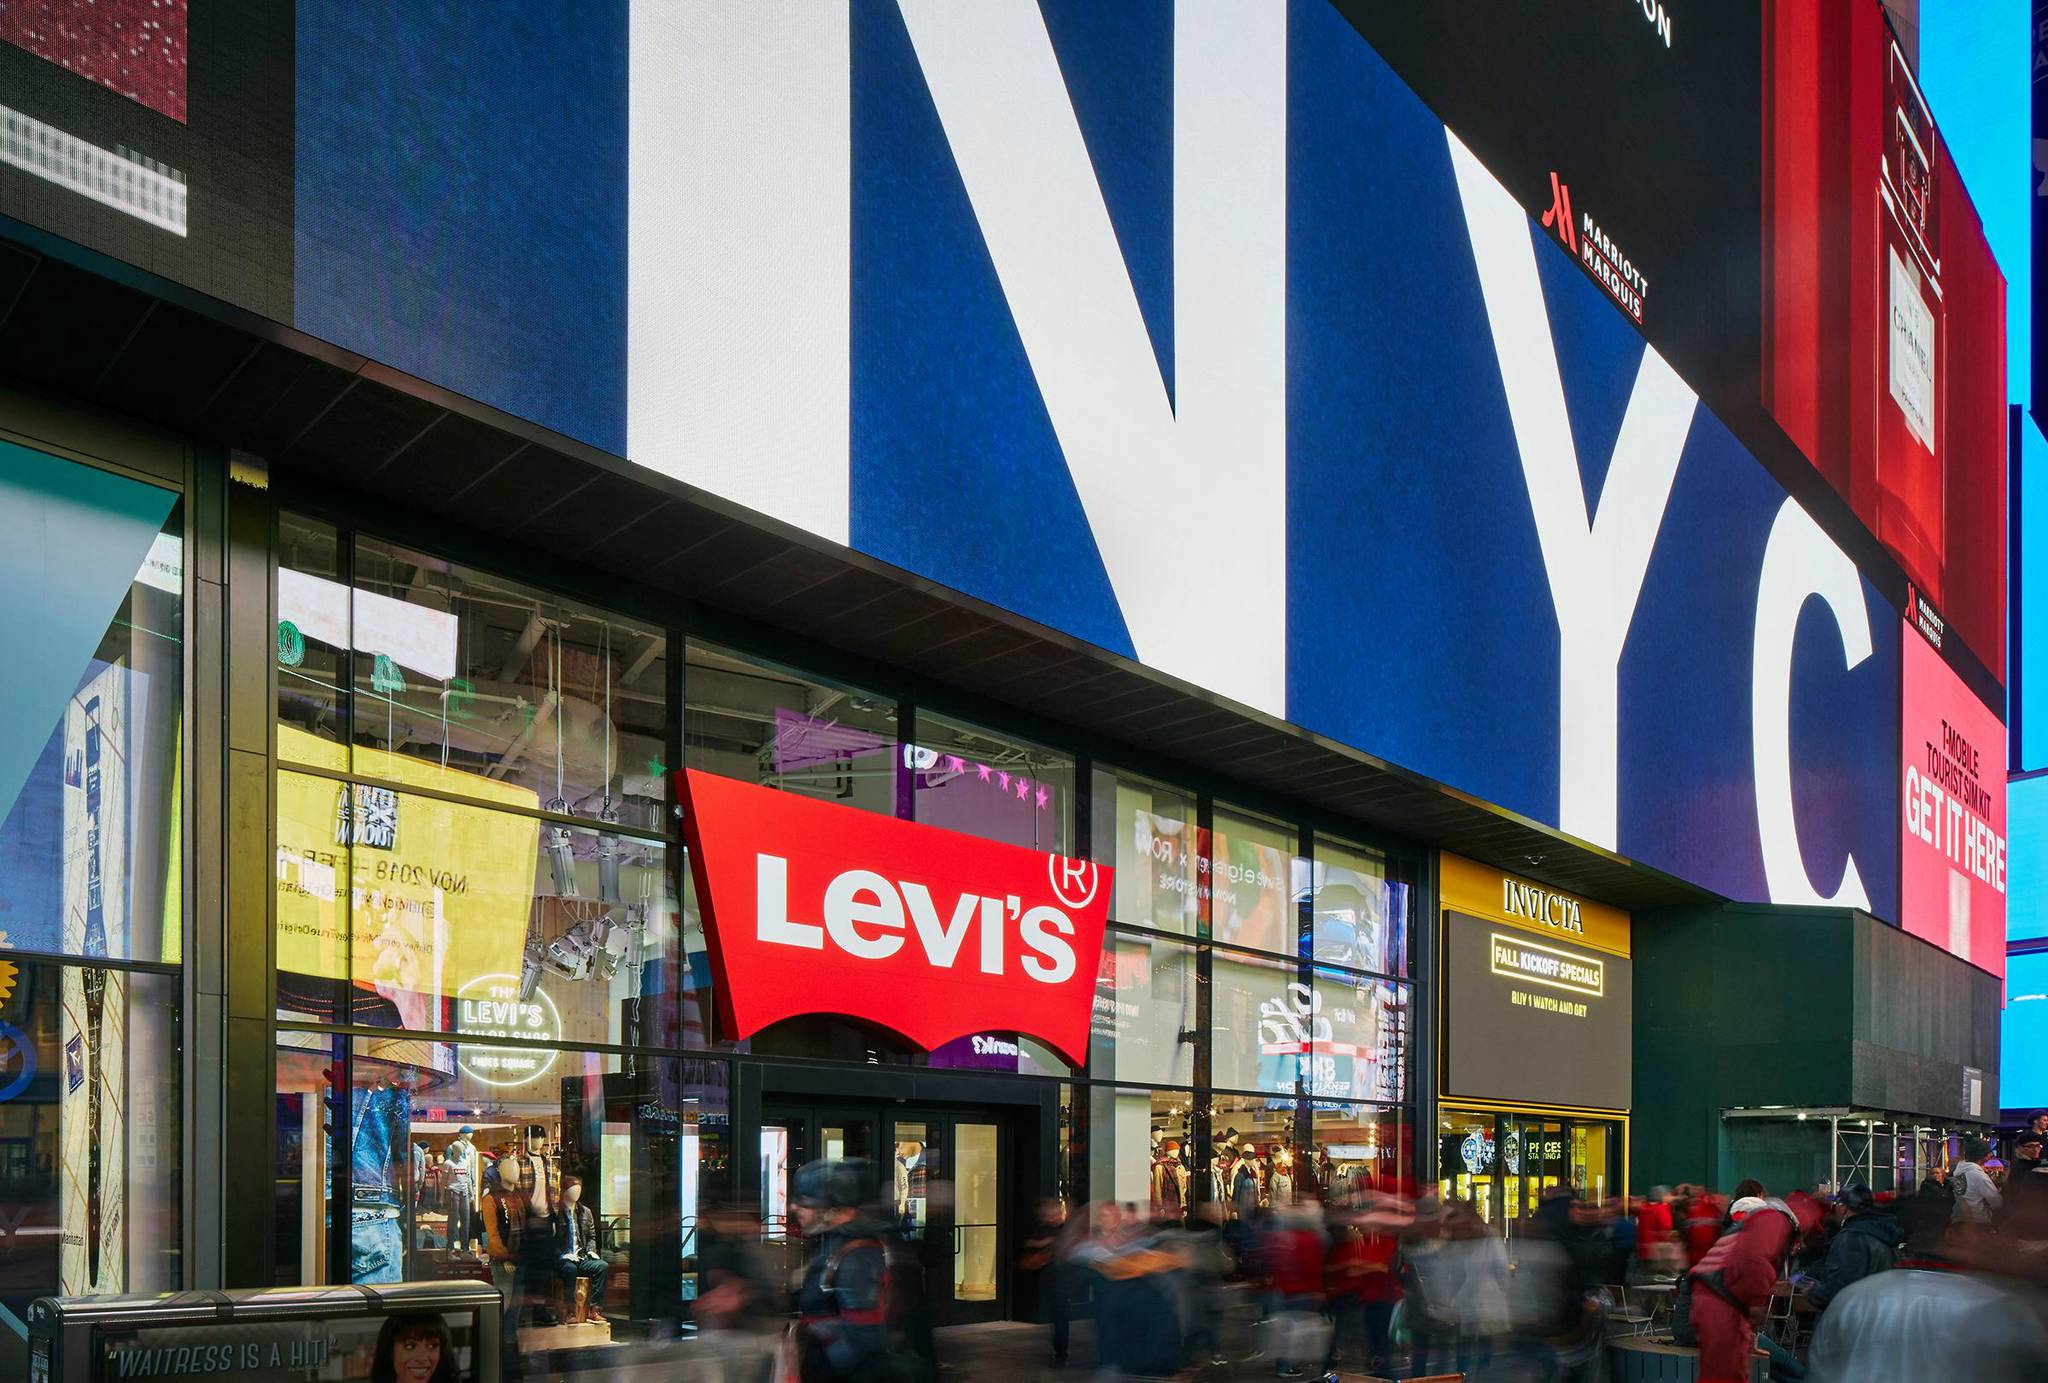 Levi's brand museum leans on its American heritage